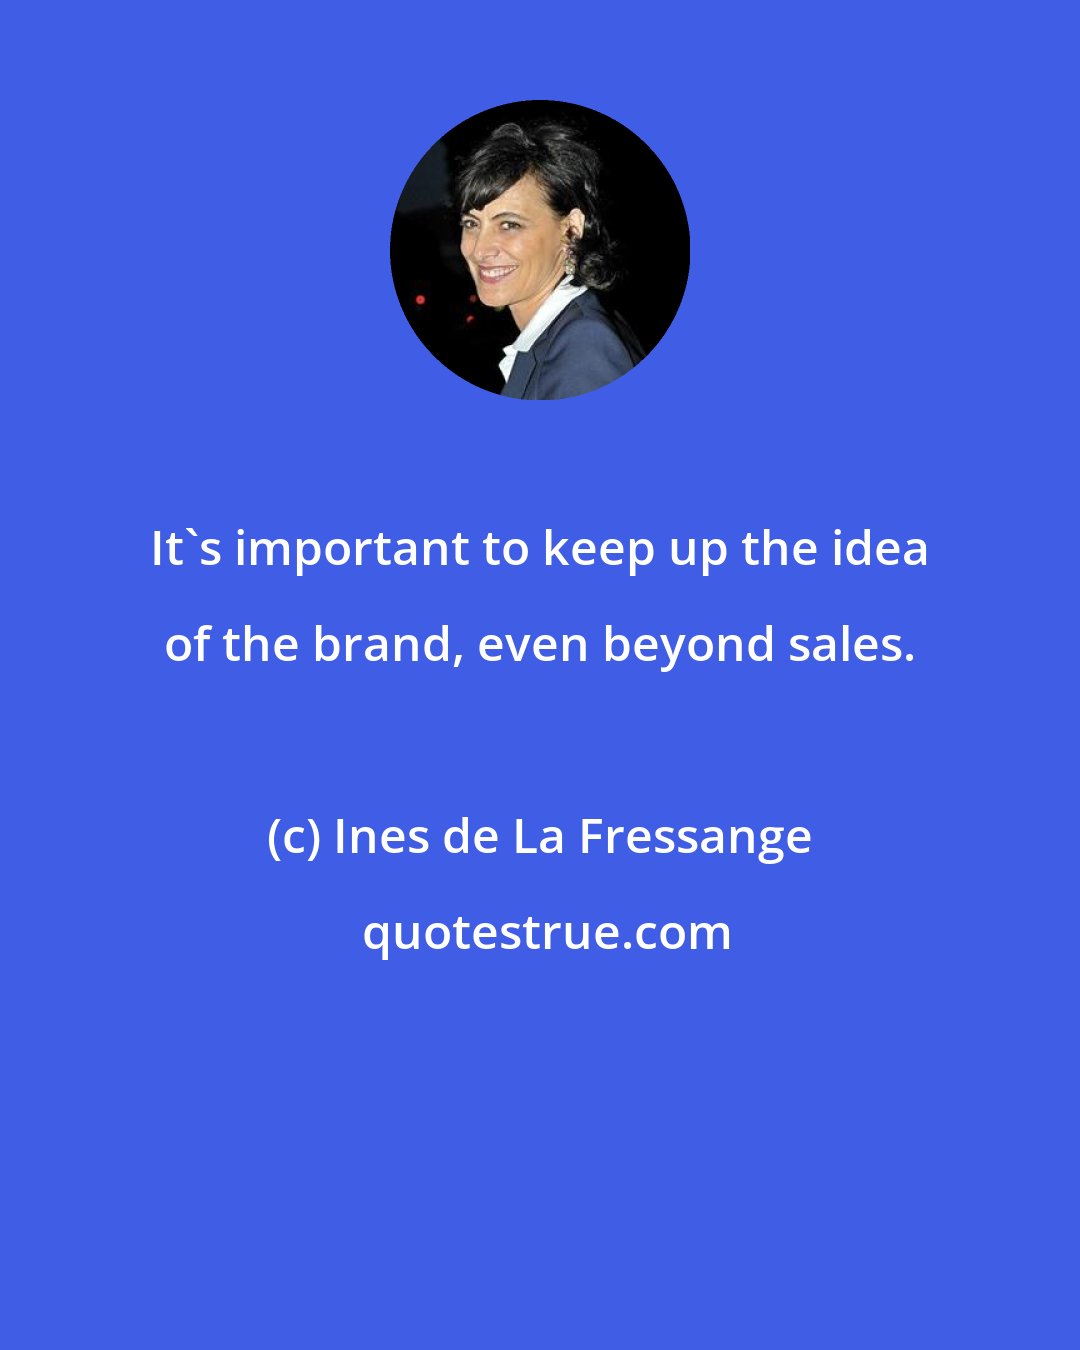 Ines de La Fressange: It's important to keep up the idea of the brand, even beyond sales.